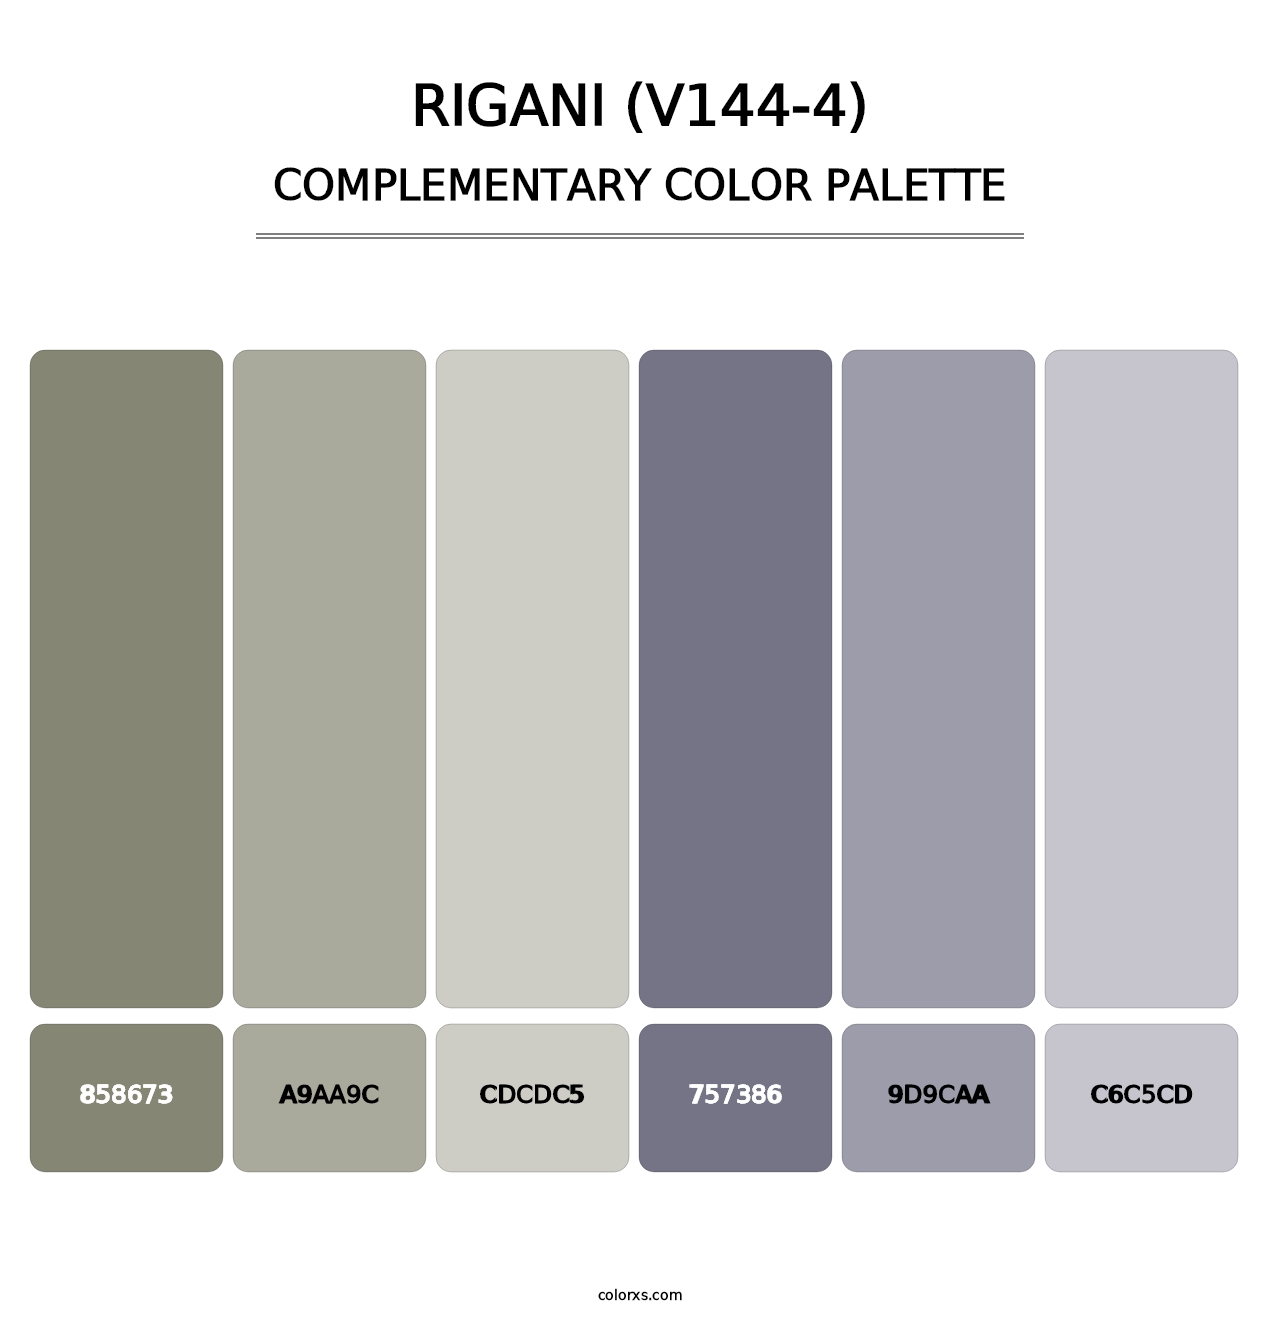 Rigani (V144-4) - Complementary Color Palette